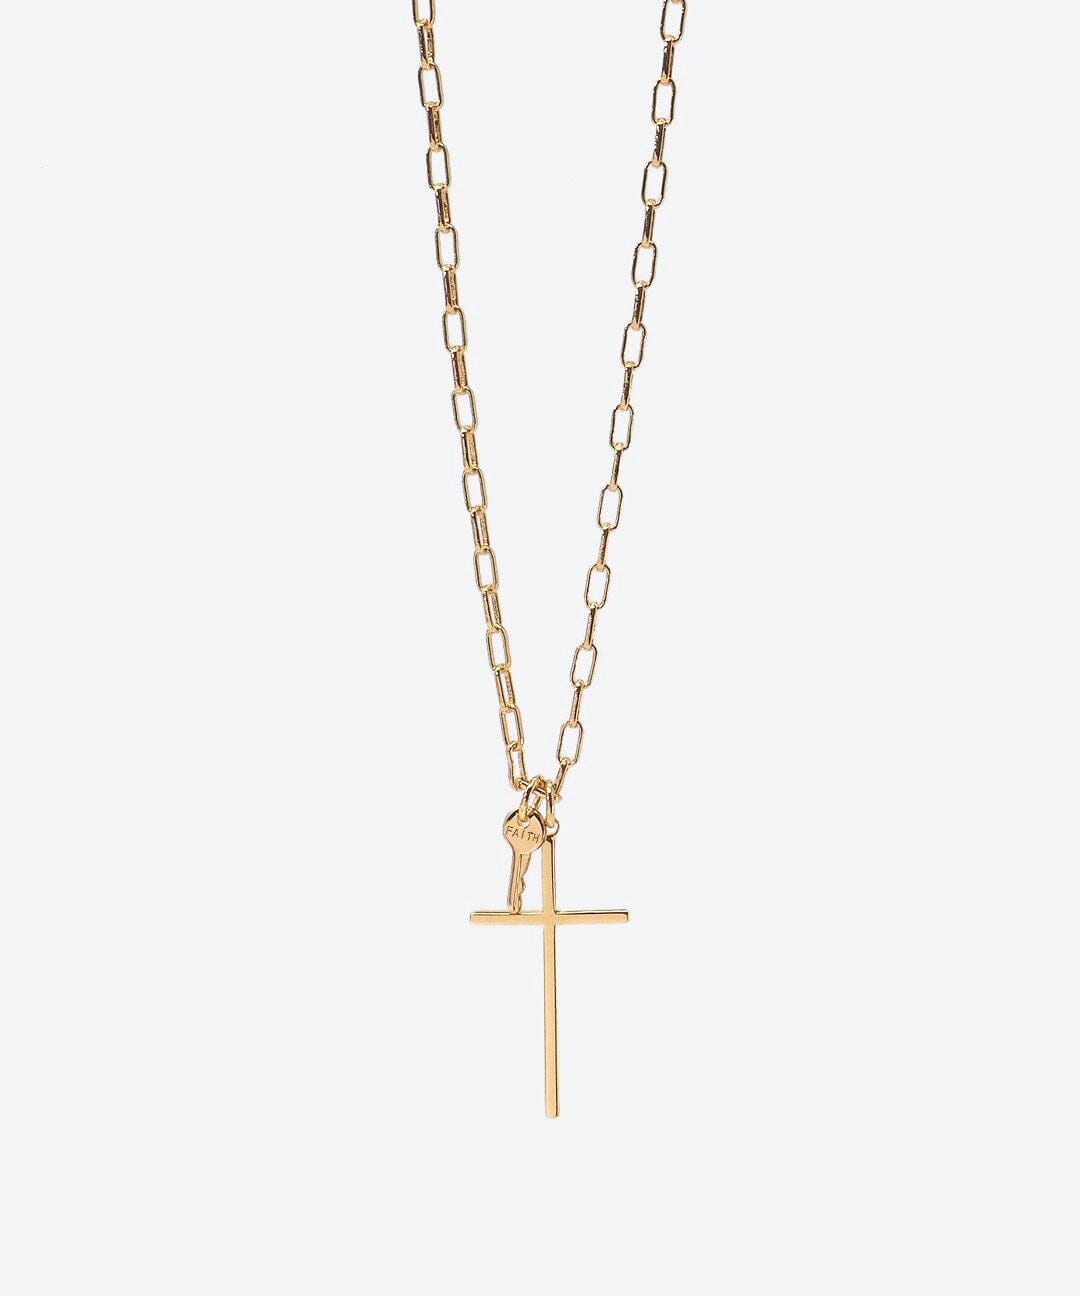 Buy KRYSTALZ Faith Inspriational Jewelry Women's Stainless Steel Jesus  Cross Pendant Faith Necklace (Pack - 1 Piece) Online In India At Discounted  Prices